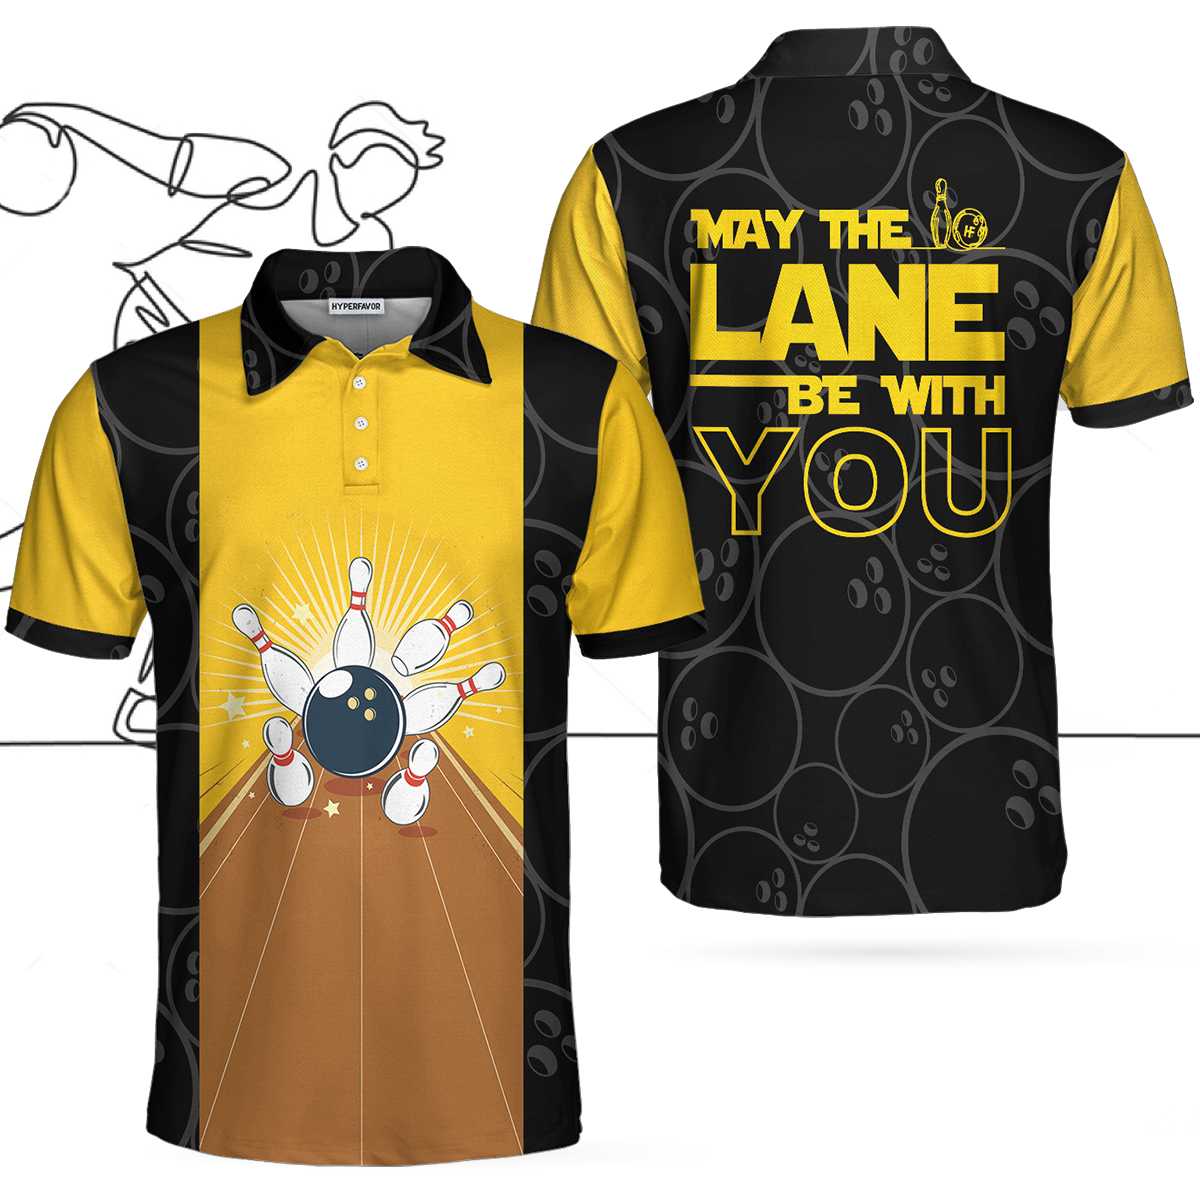 May The Lane Be With You Polo Shirt/ Black And Yellow Bowling Ball Pattern Shirt/ Funny Sayings Shirt Coolspod